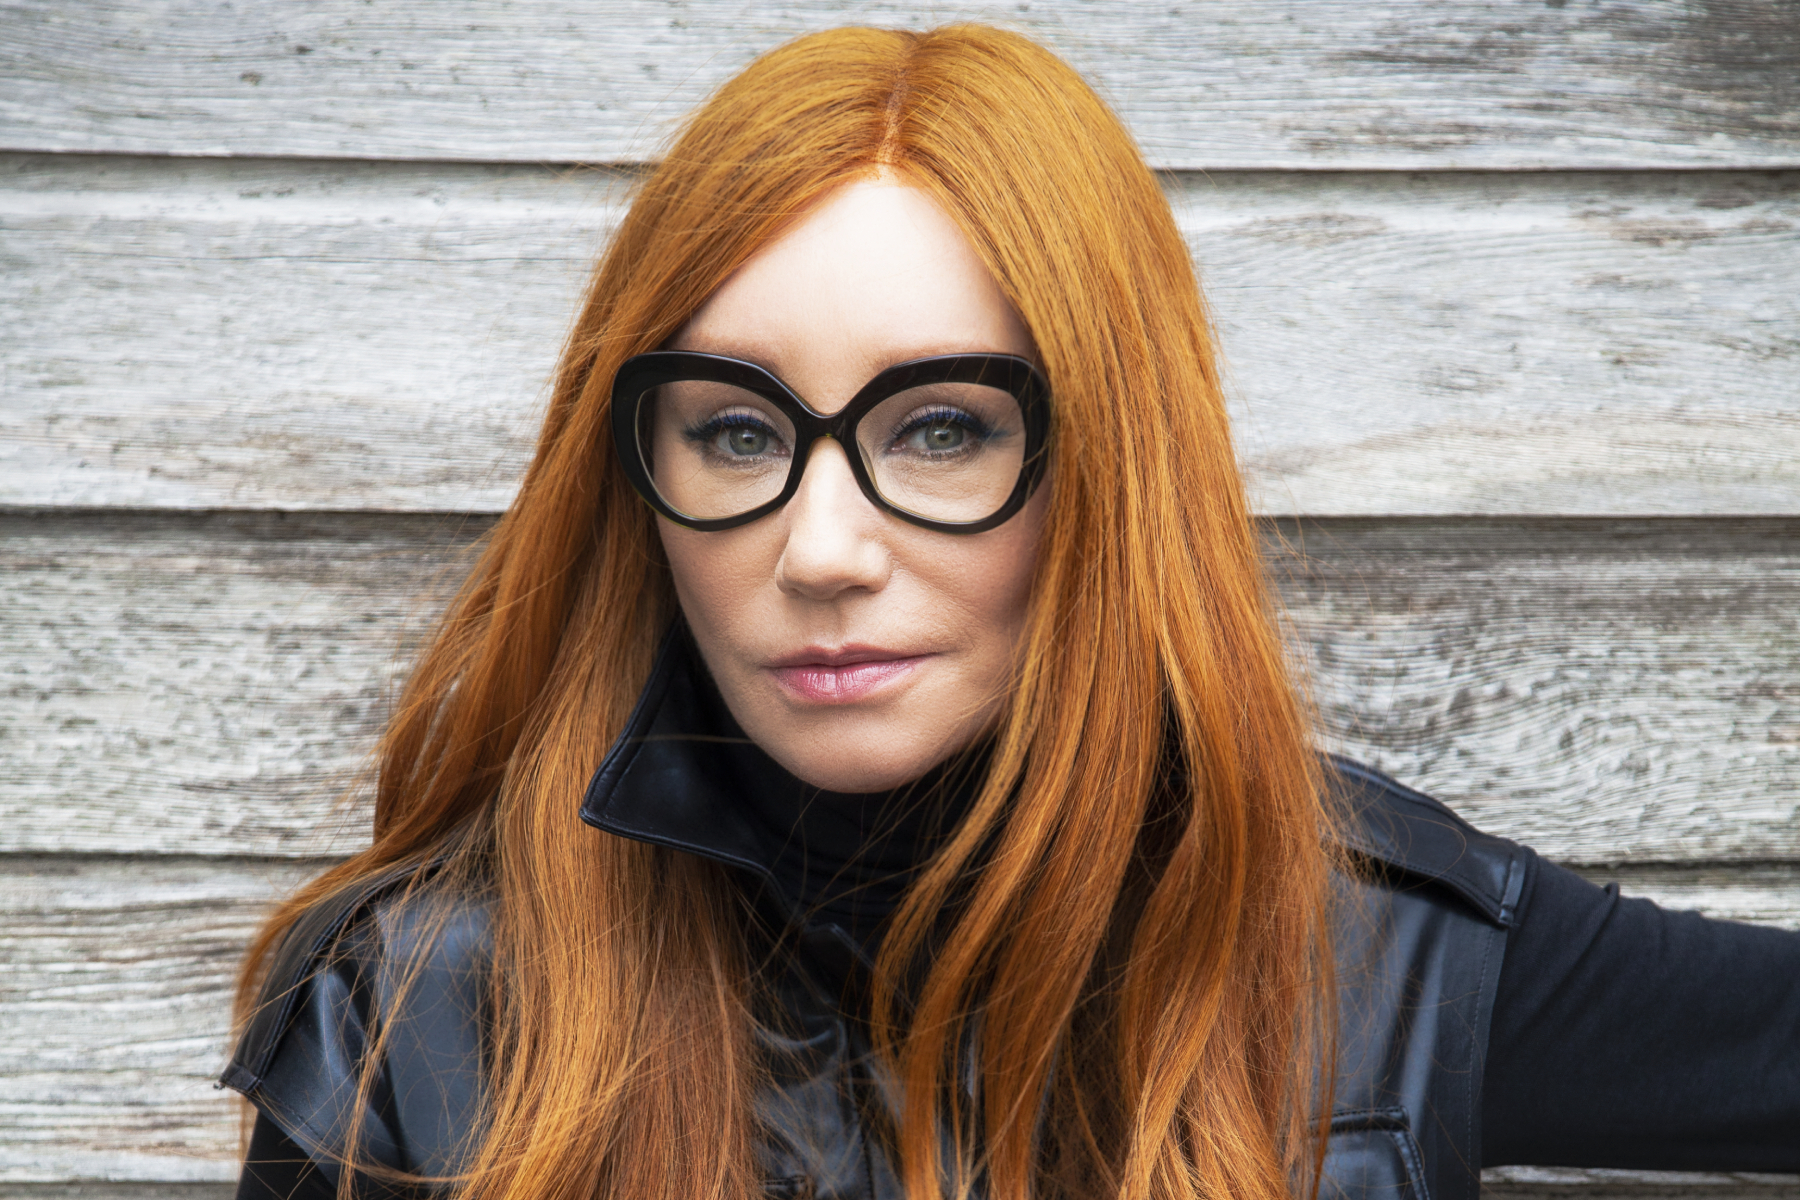 Tori Amos Finds Safety ‘Speaking With Trees’ in New Song